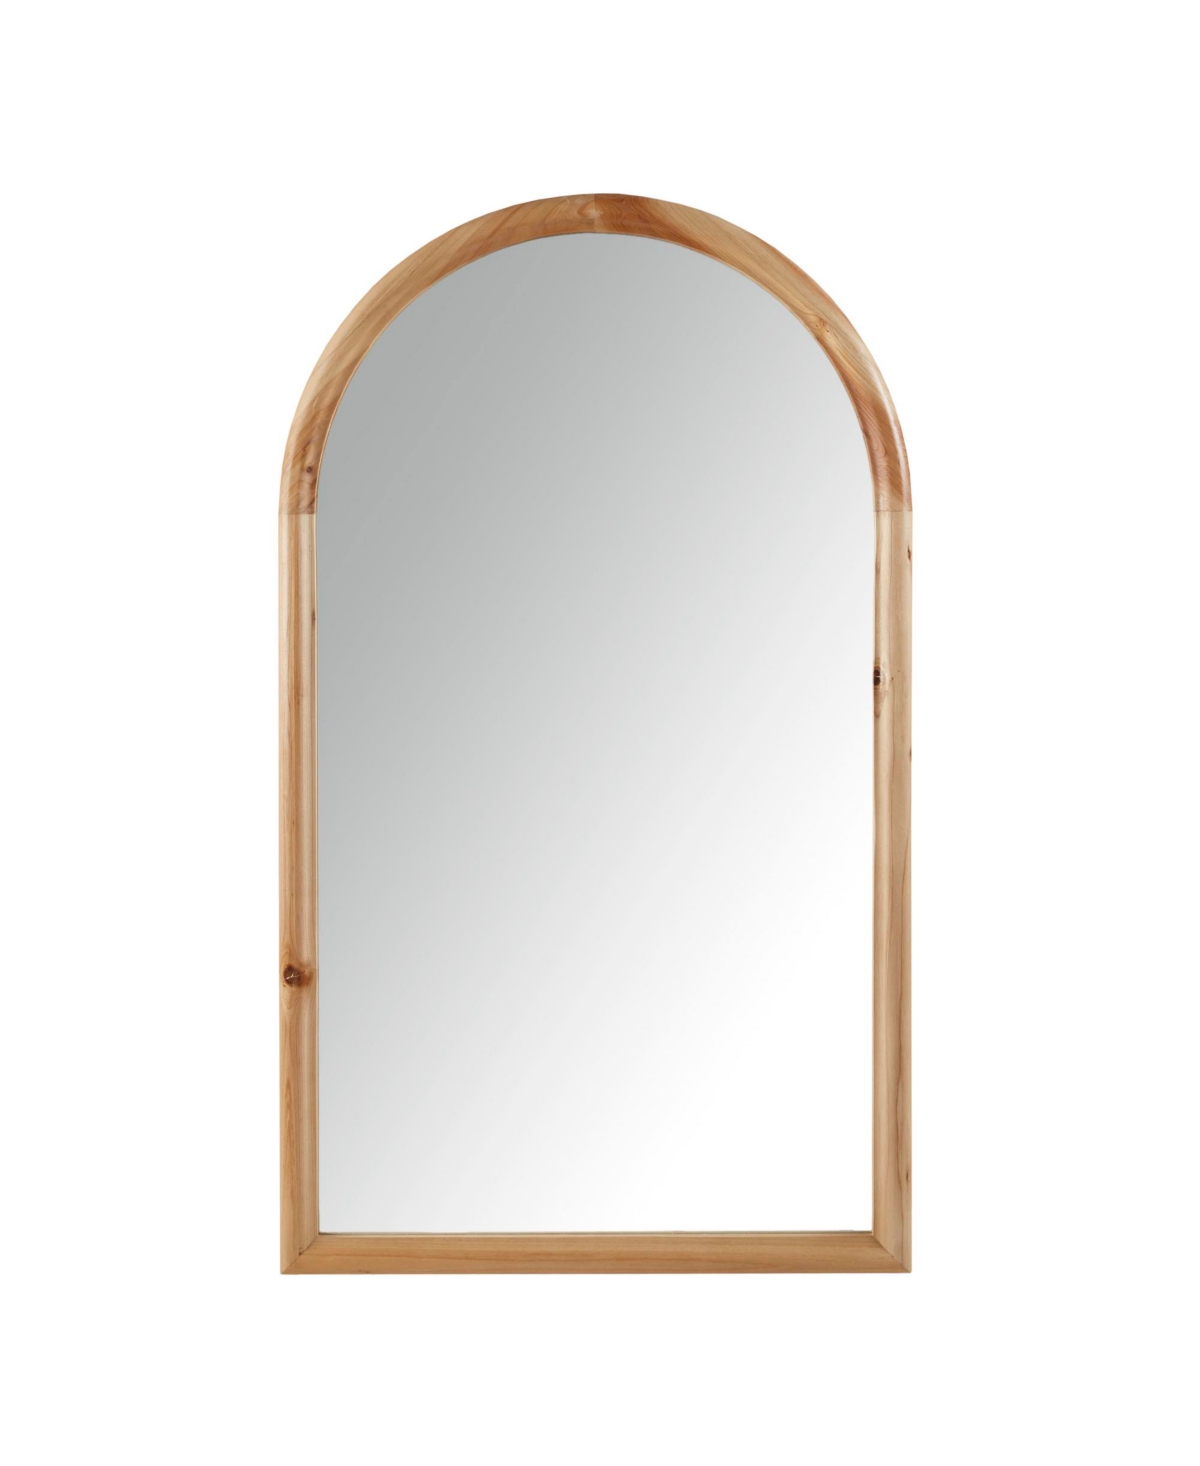 Remi 26" x 43" x 2" Arched Wood Wall Mirror - Natural